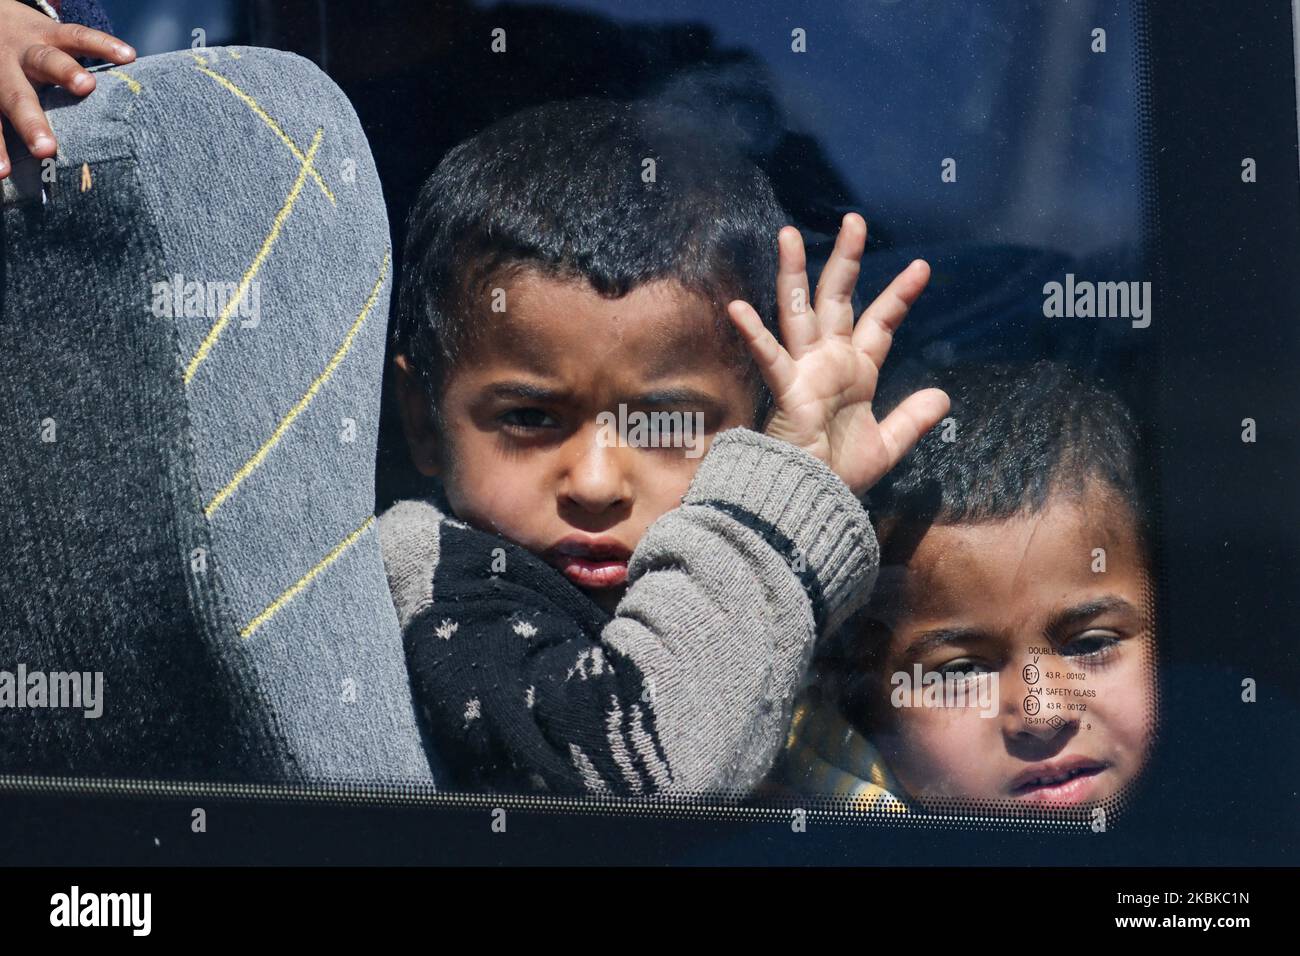 Children wait in the bus before taking them to the new camp. New refugee and migrant camp facility in Greece at Kleidi area near Promahonas village in Serres region, at Greek - Bulgarian borders, is receiving the first wave of people, asylum seekers who entered Greece after 1st of March 2020 where the country stopped accepting asylum applications. Newcomers are from the islands Lesvos, Samos and Chios and have been transferred by ferry to Kavala and then to Kleidi by bus in order to record them, photograph, temporarily host and then deport to them back to their country of origin like Afghanist Stock Photo